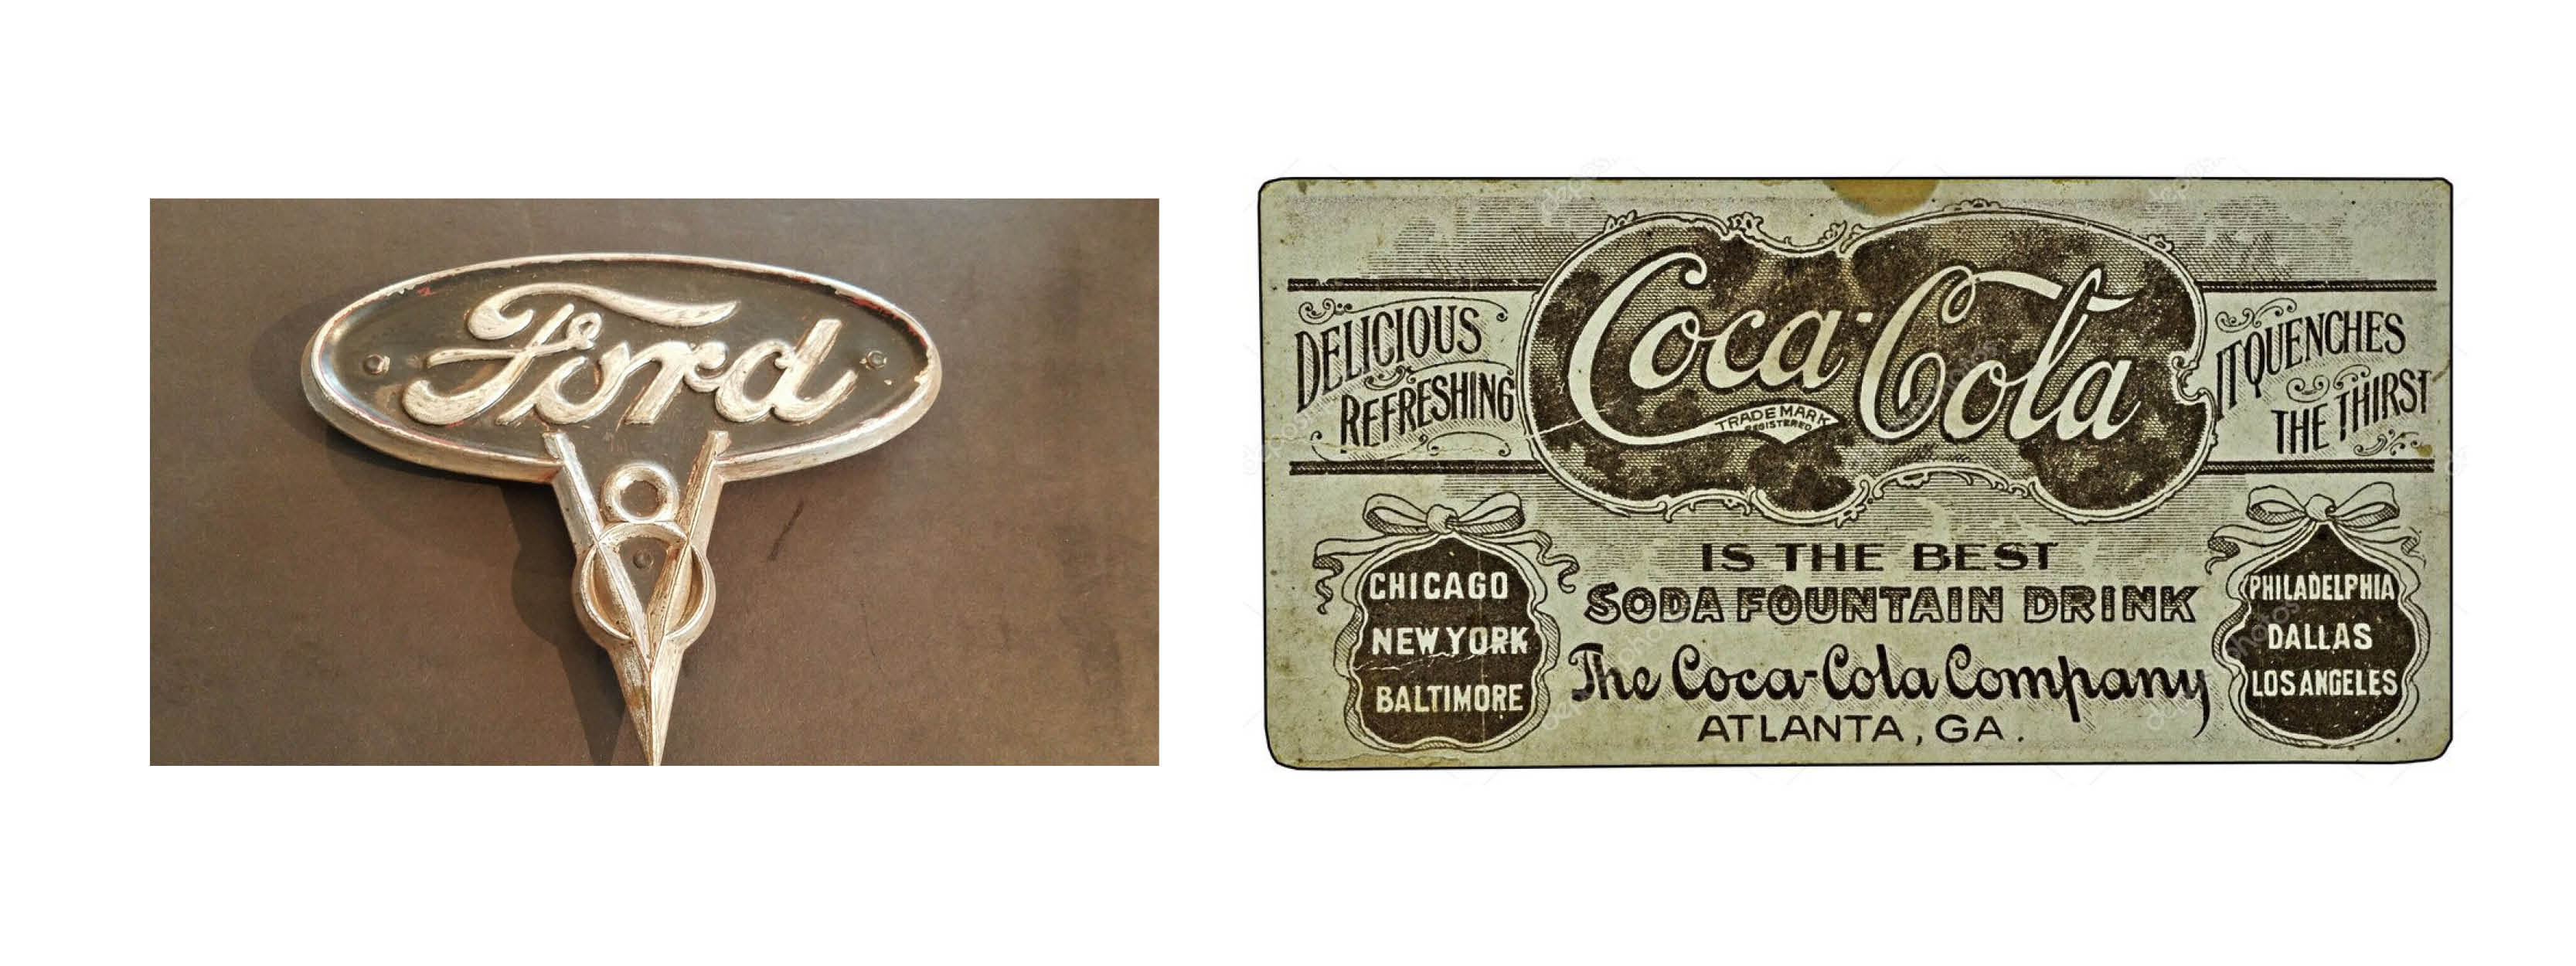 Both Ford and Coca-Cola logos are also pure examples of Spencerian script variations.